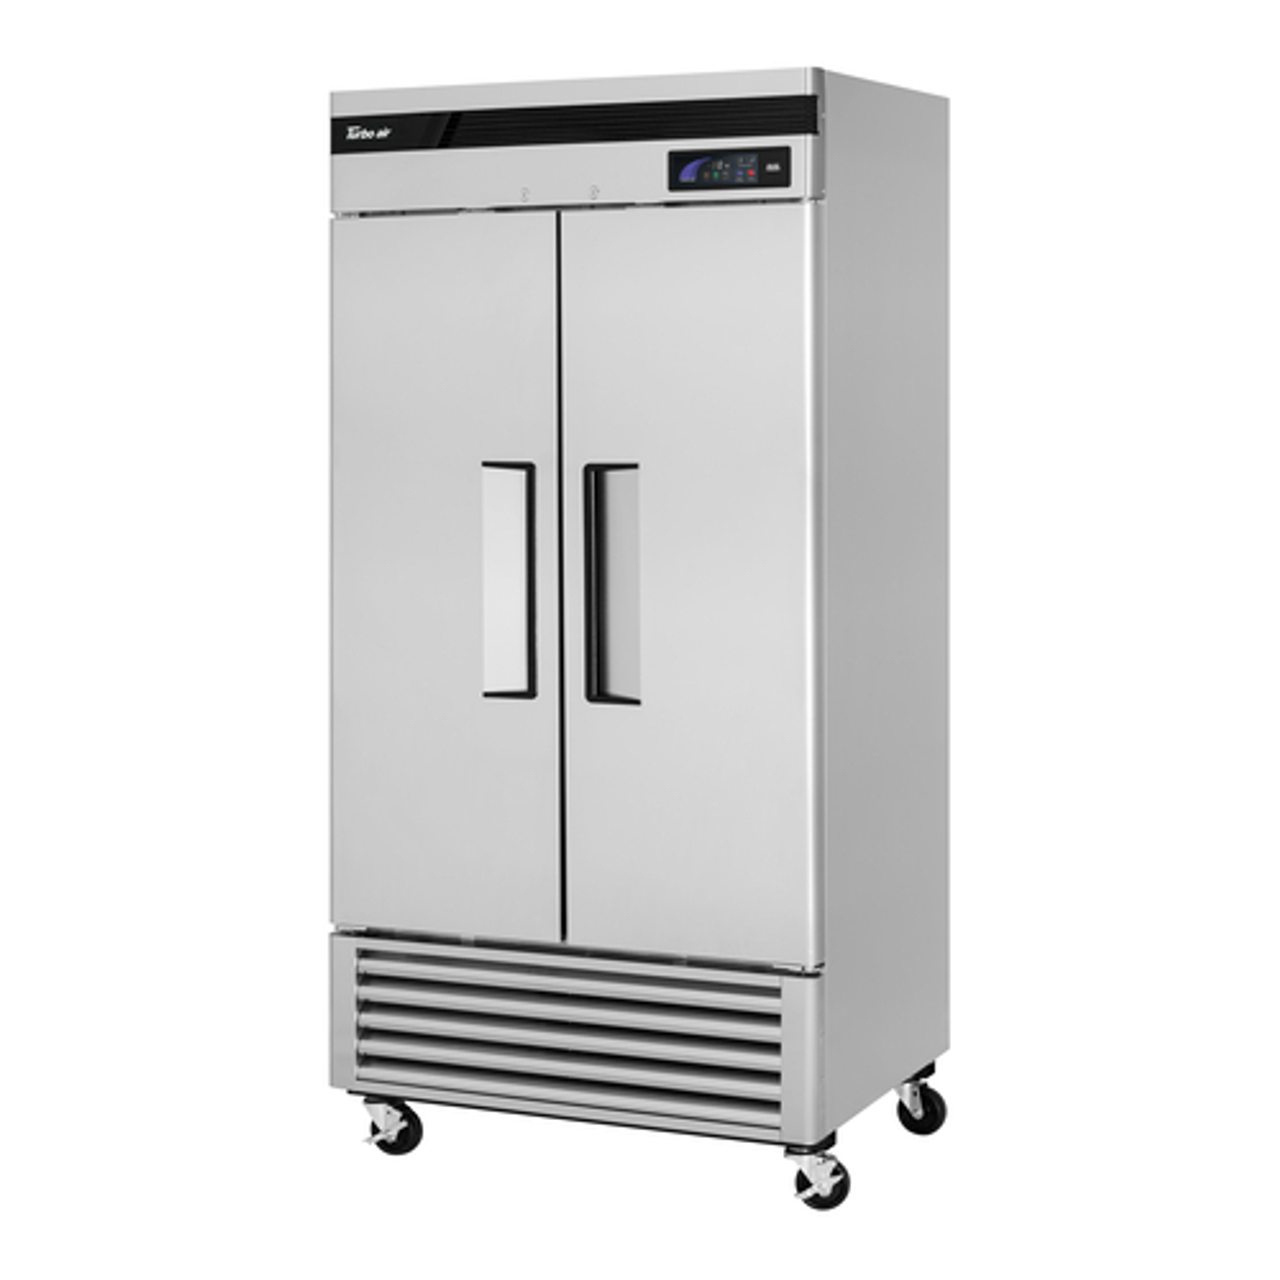 Turbo Air TSF-35SDN-N 2 Section Reach In Freezer - 29.19 Cu. Ft. - Super Deluxe Series